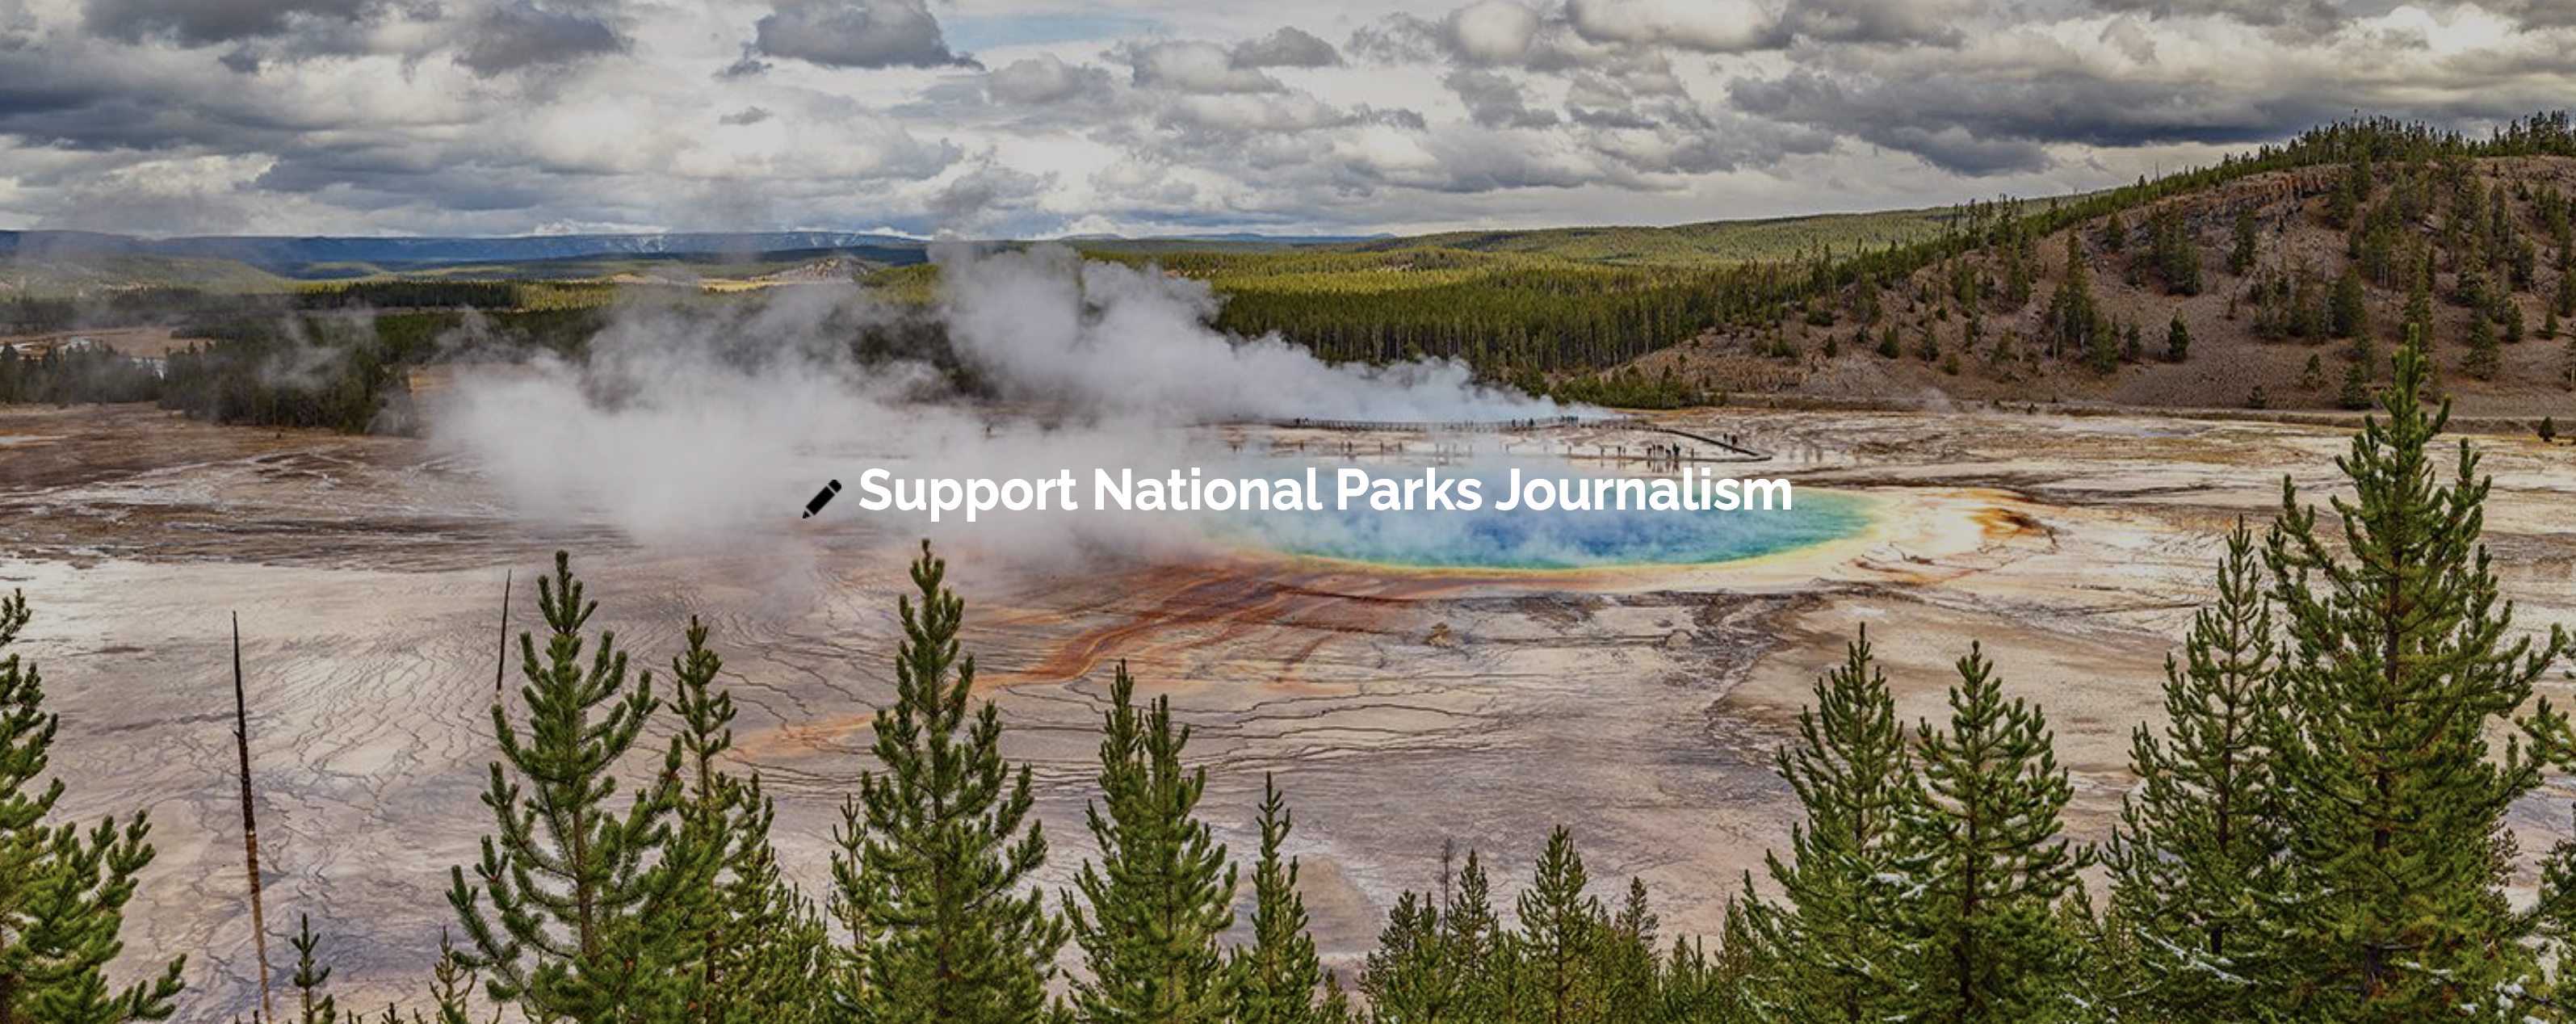 Support Journalism on National Parks